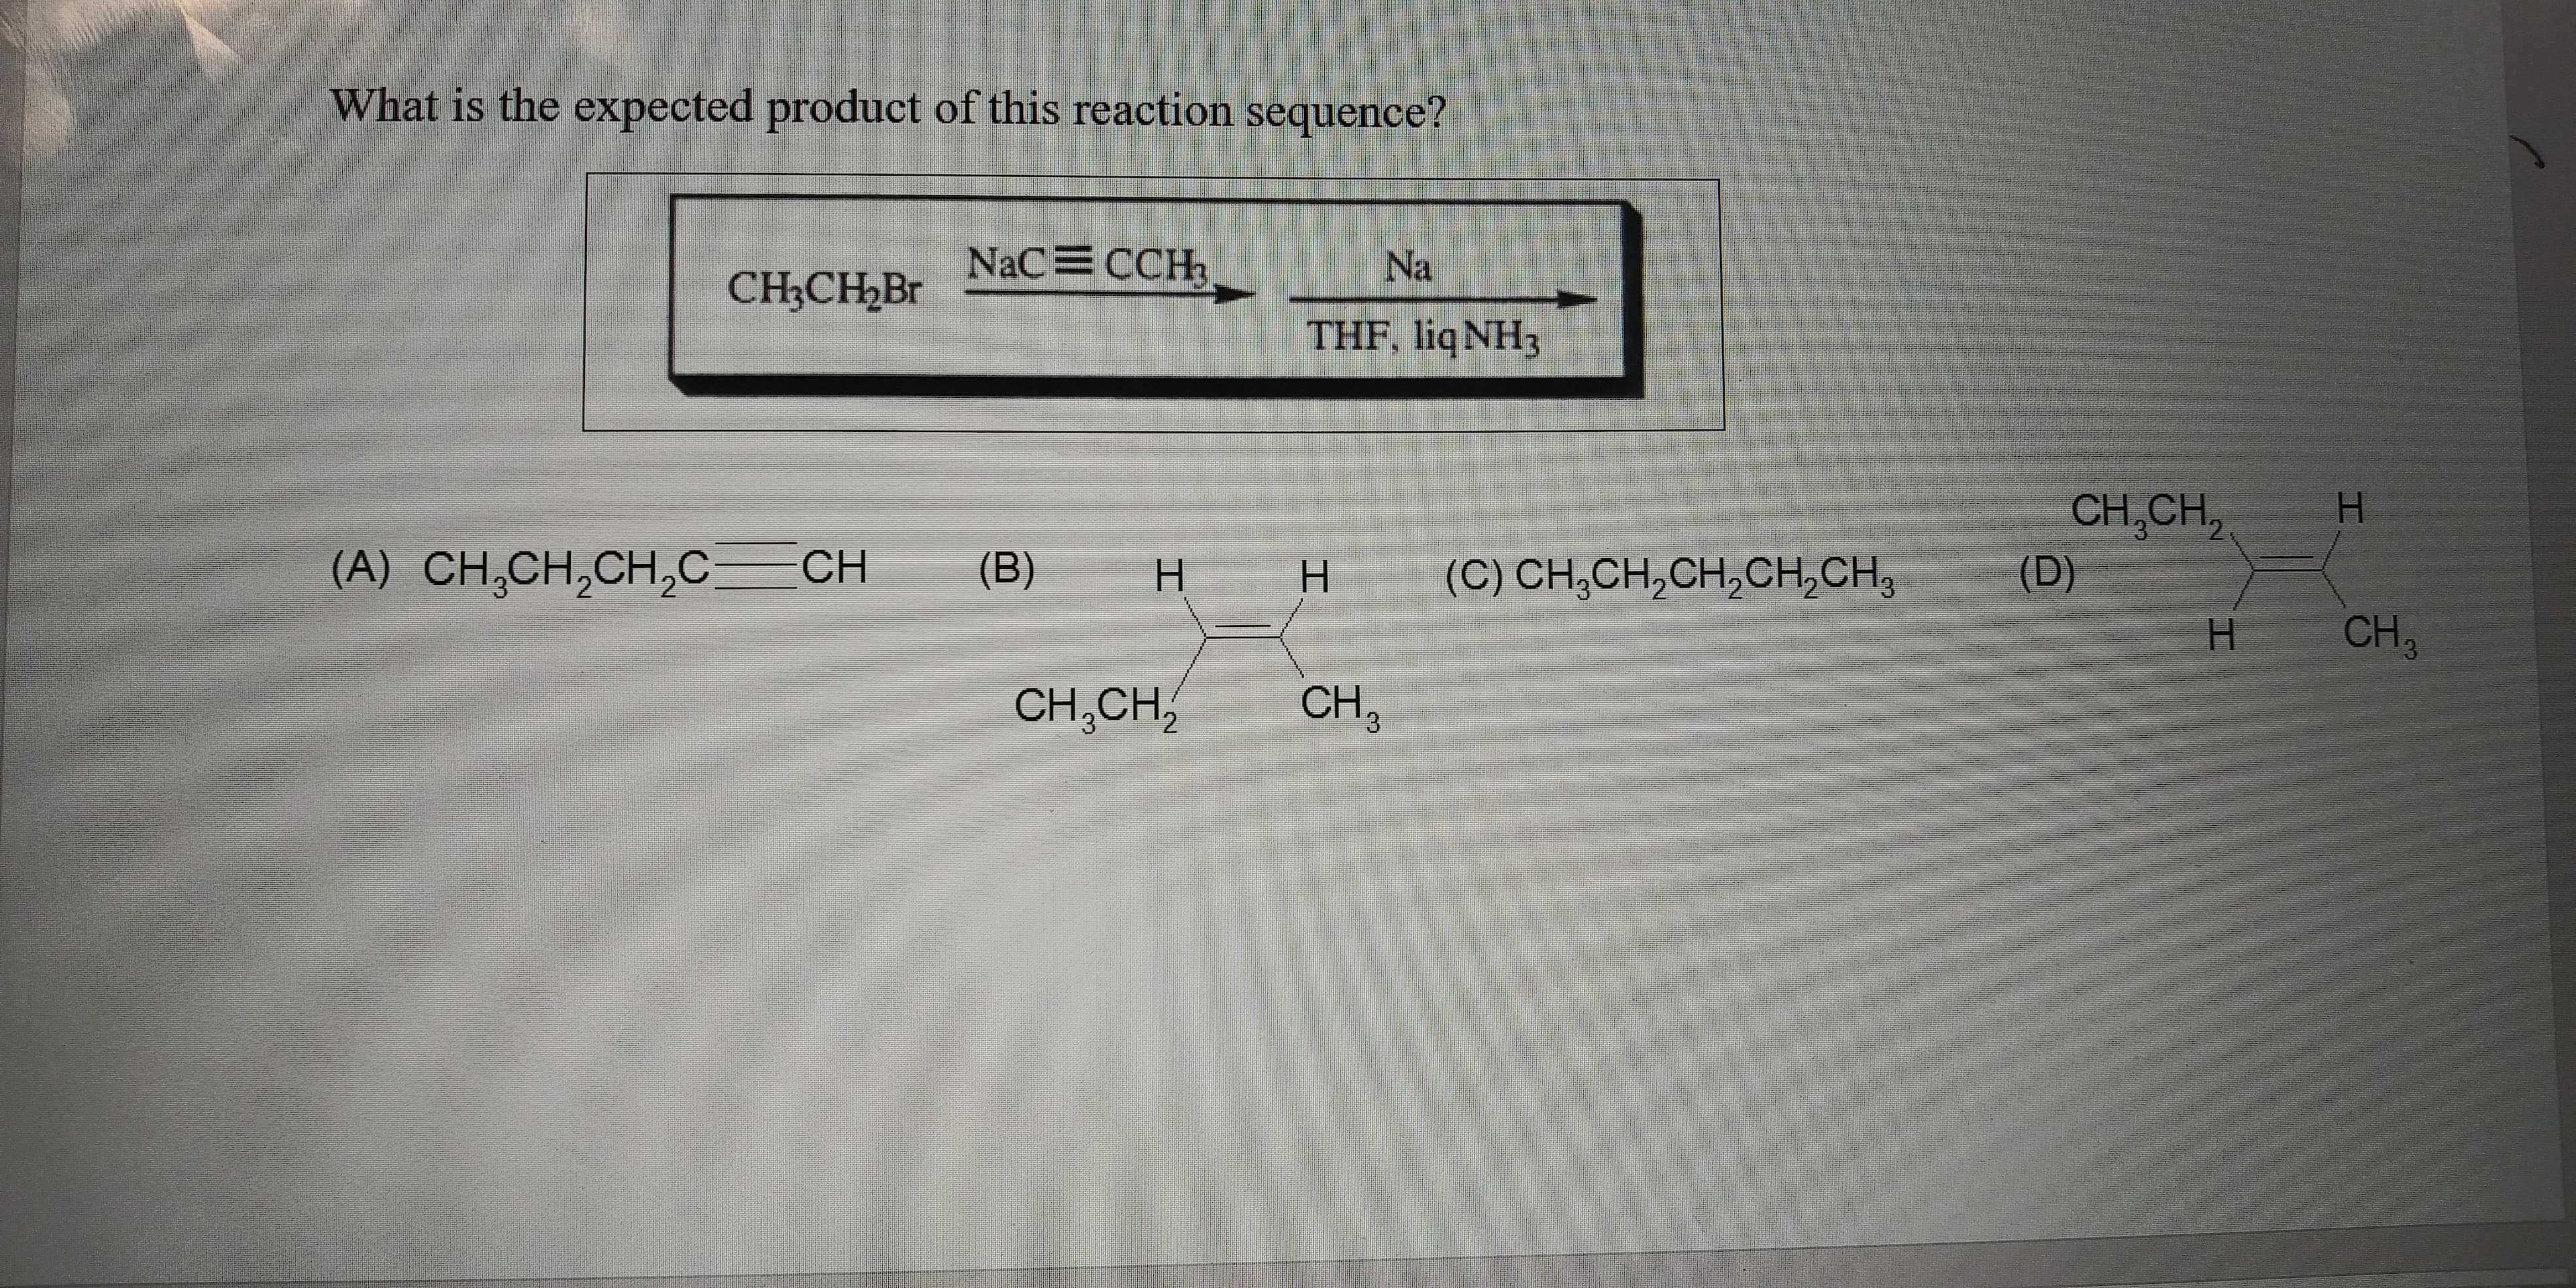 What is the expected product of this reaction scquence?
NaC CCH
CHCH Br
Na
THE hgNH
(А) CH,CH,CH,с — сн
CH,CH,
(D)
(B)
(с сн, сH,сH, Cн СH,
CH
CH,CH
CH,
